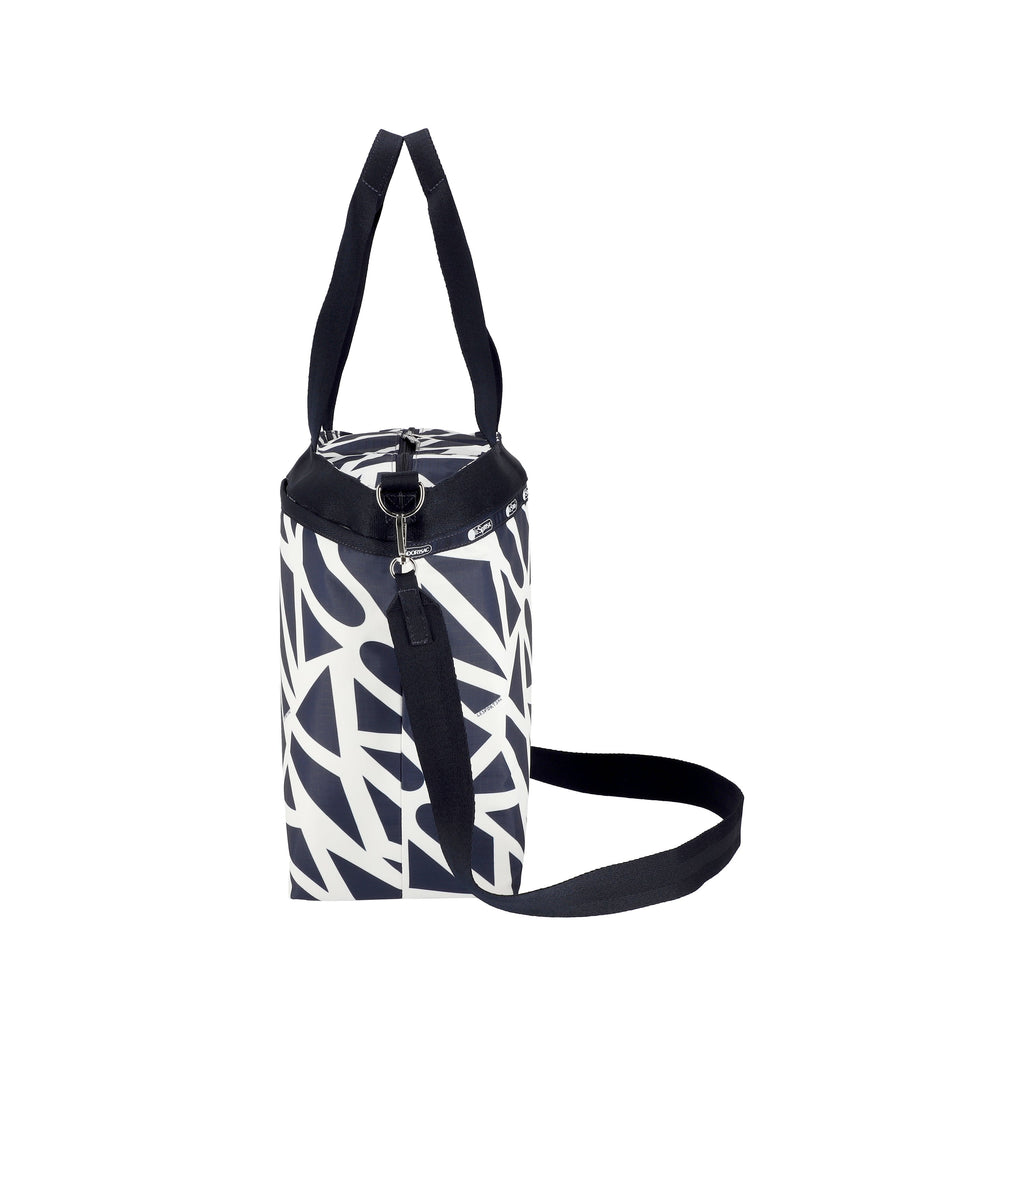 Large Bucket Tote - 24581846073392